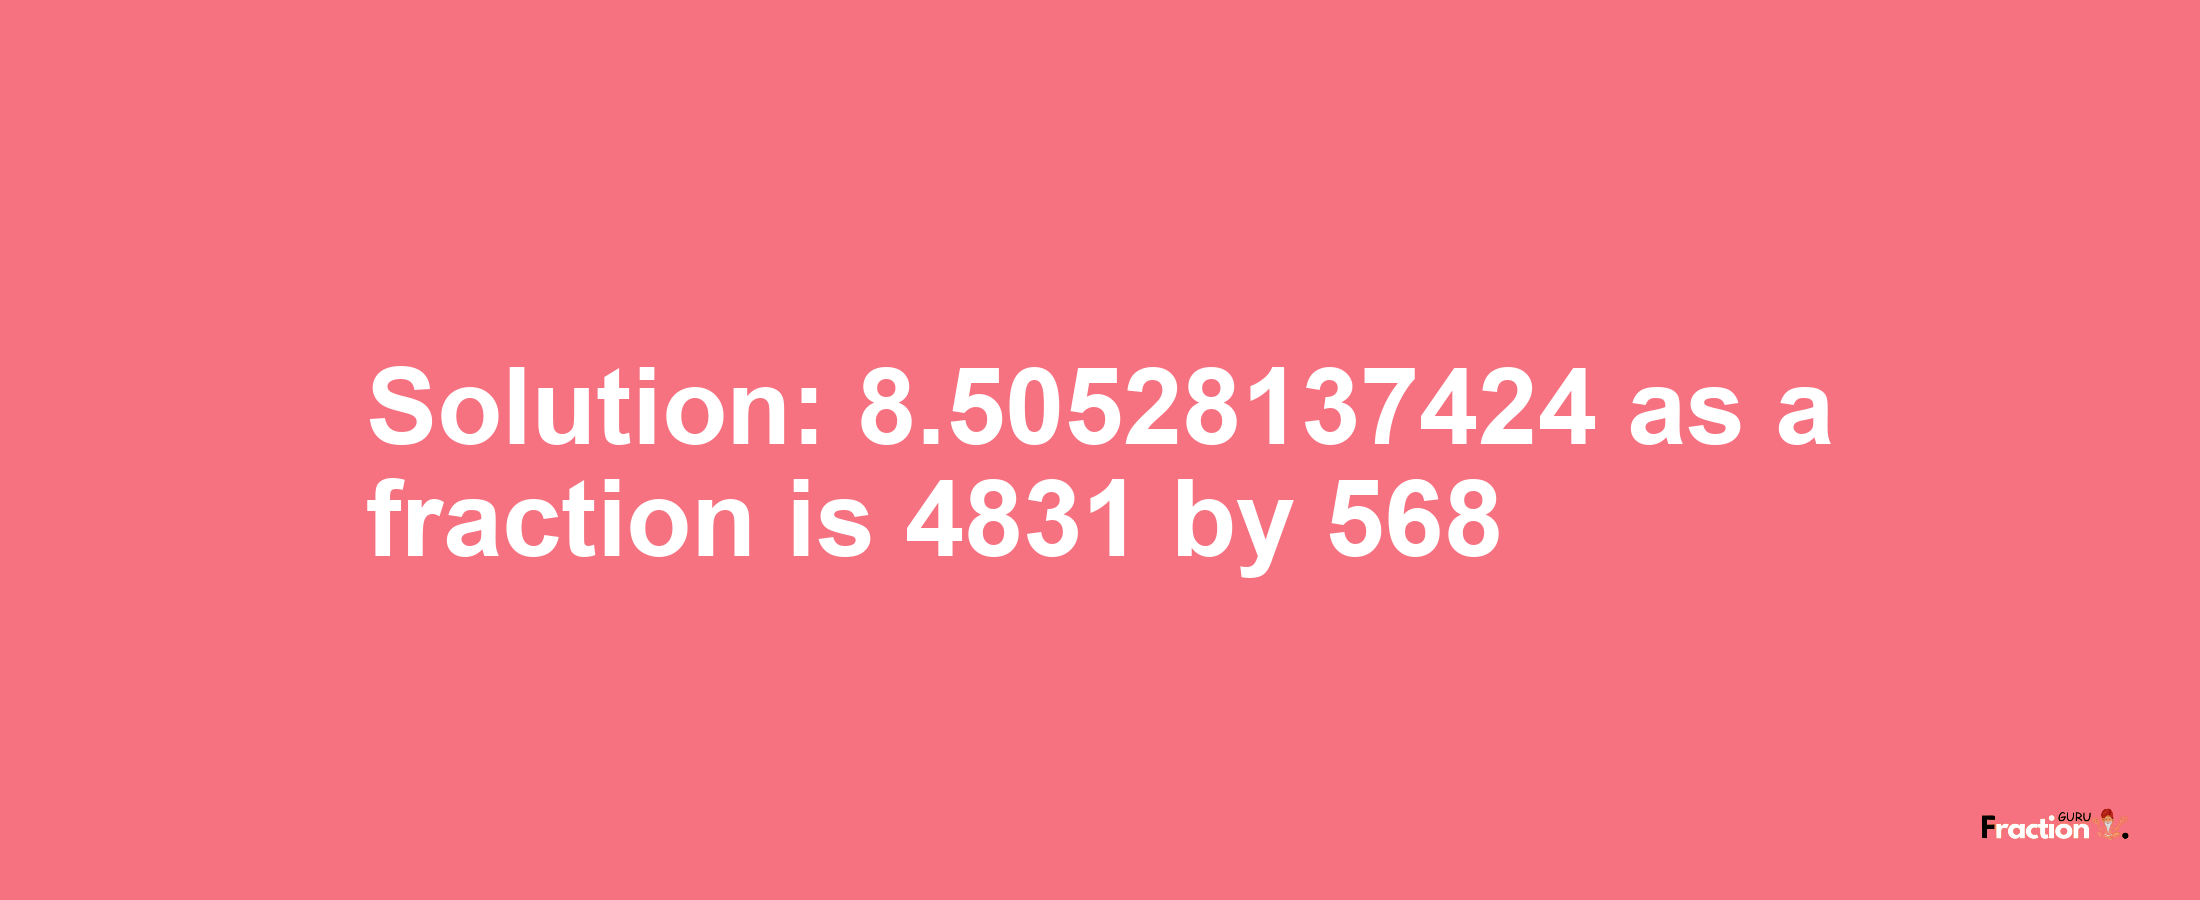 Solution:8.50528137424 as a fraction is 4831/568